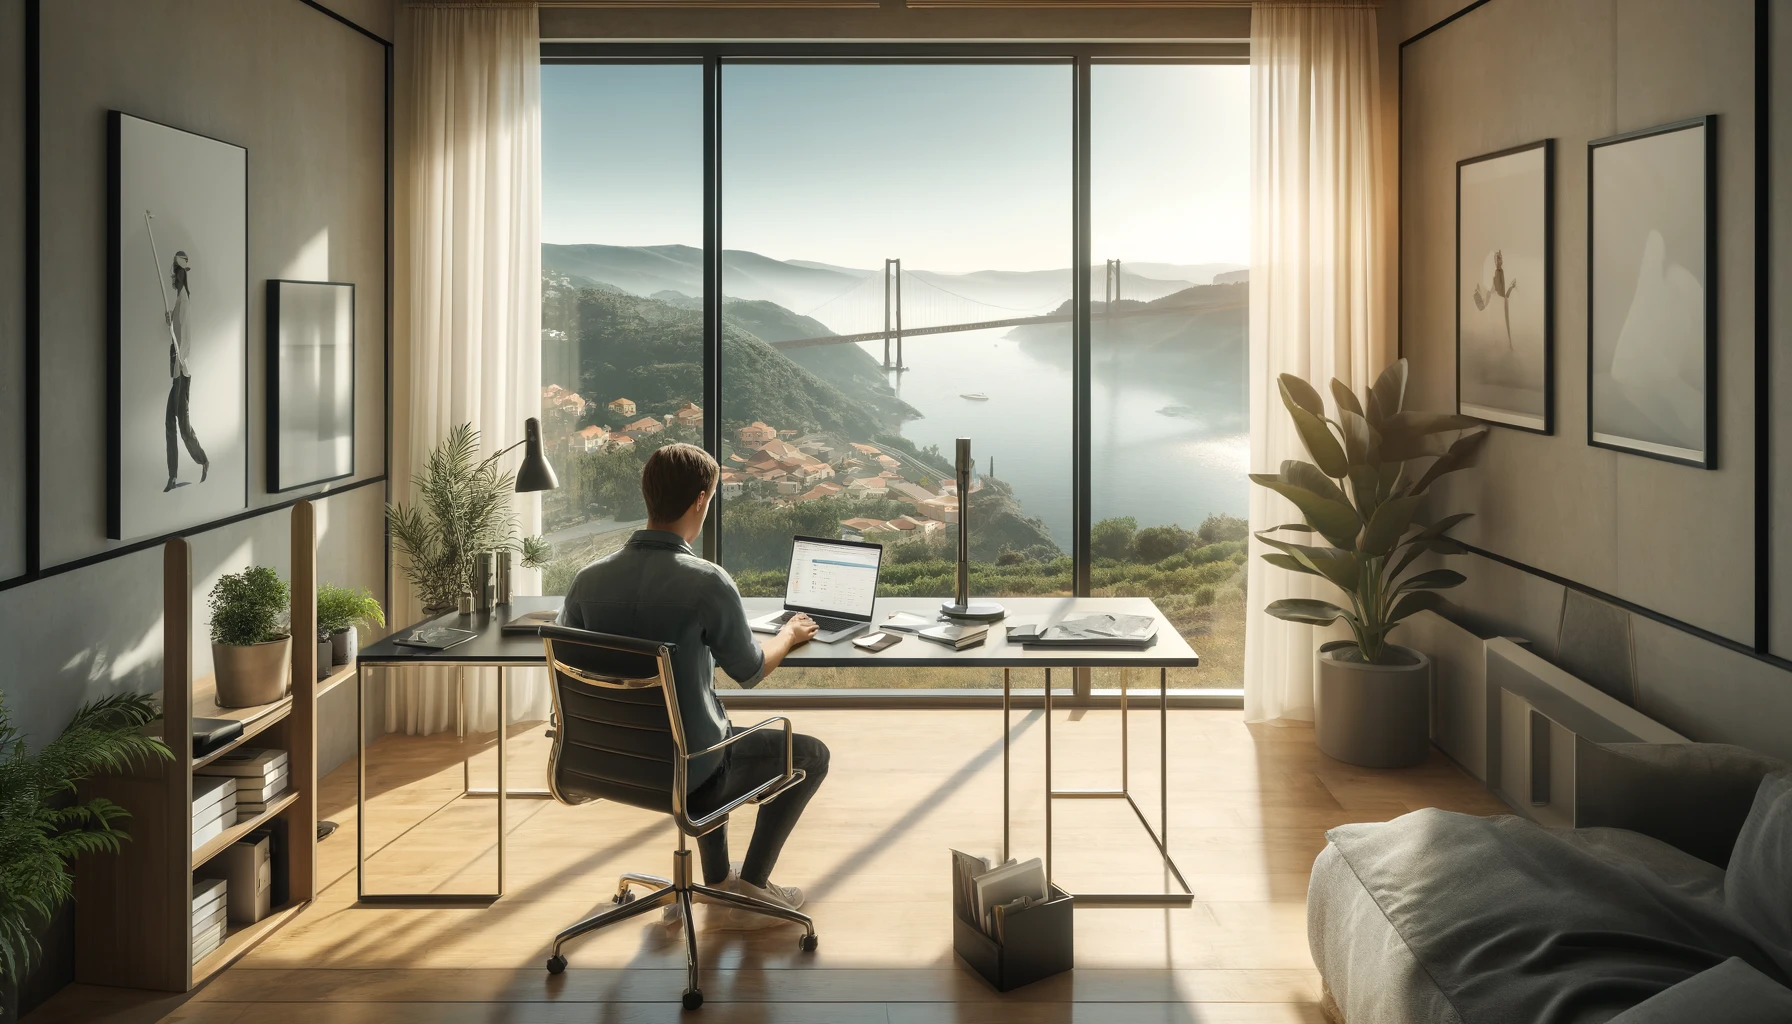 Modern high-tech workspace with a panoramic view of Portugal's coastline or countryside, embodying the lifestyle of working remotely.